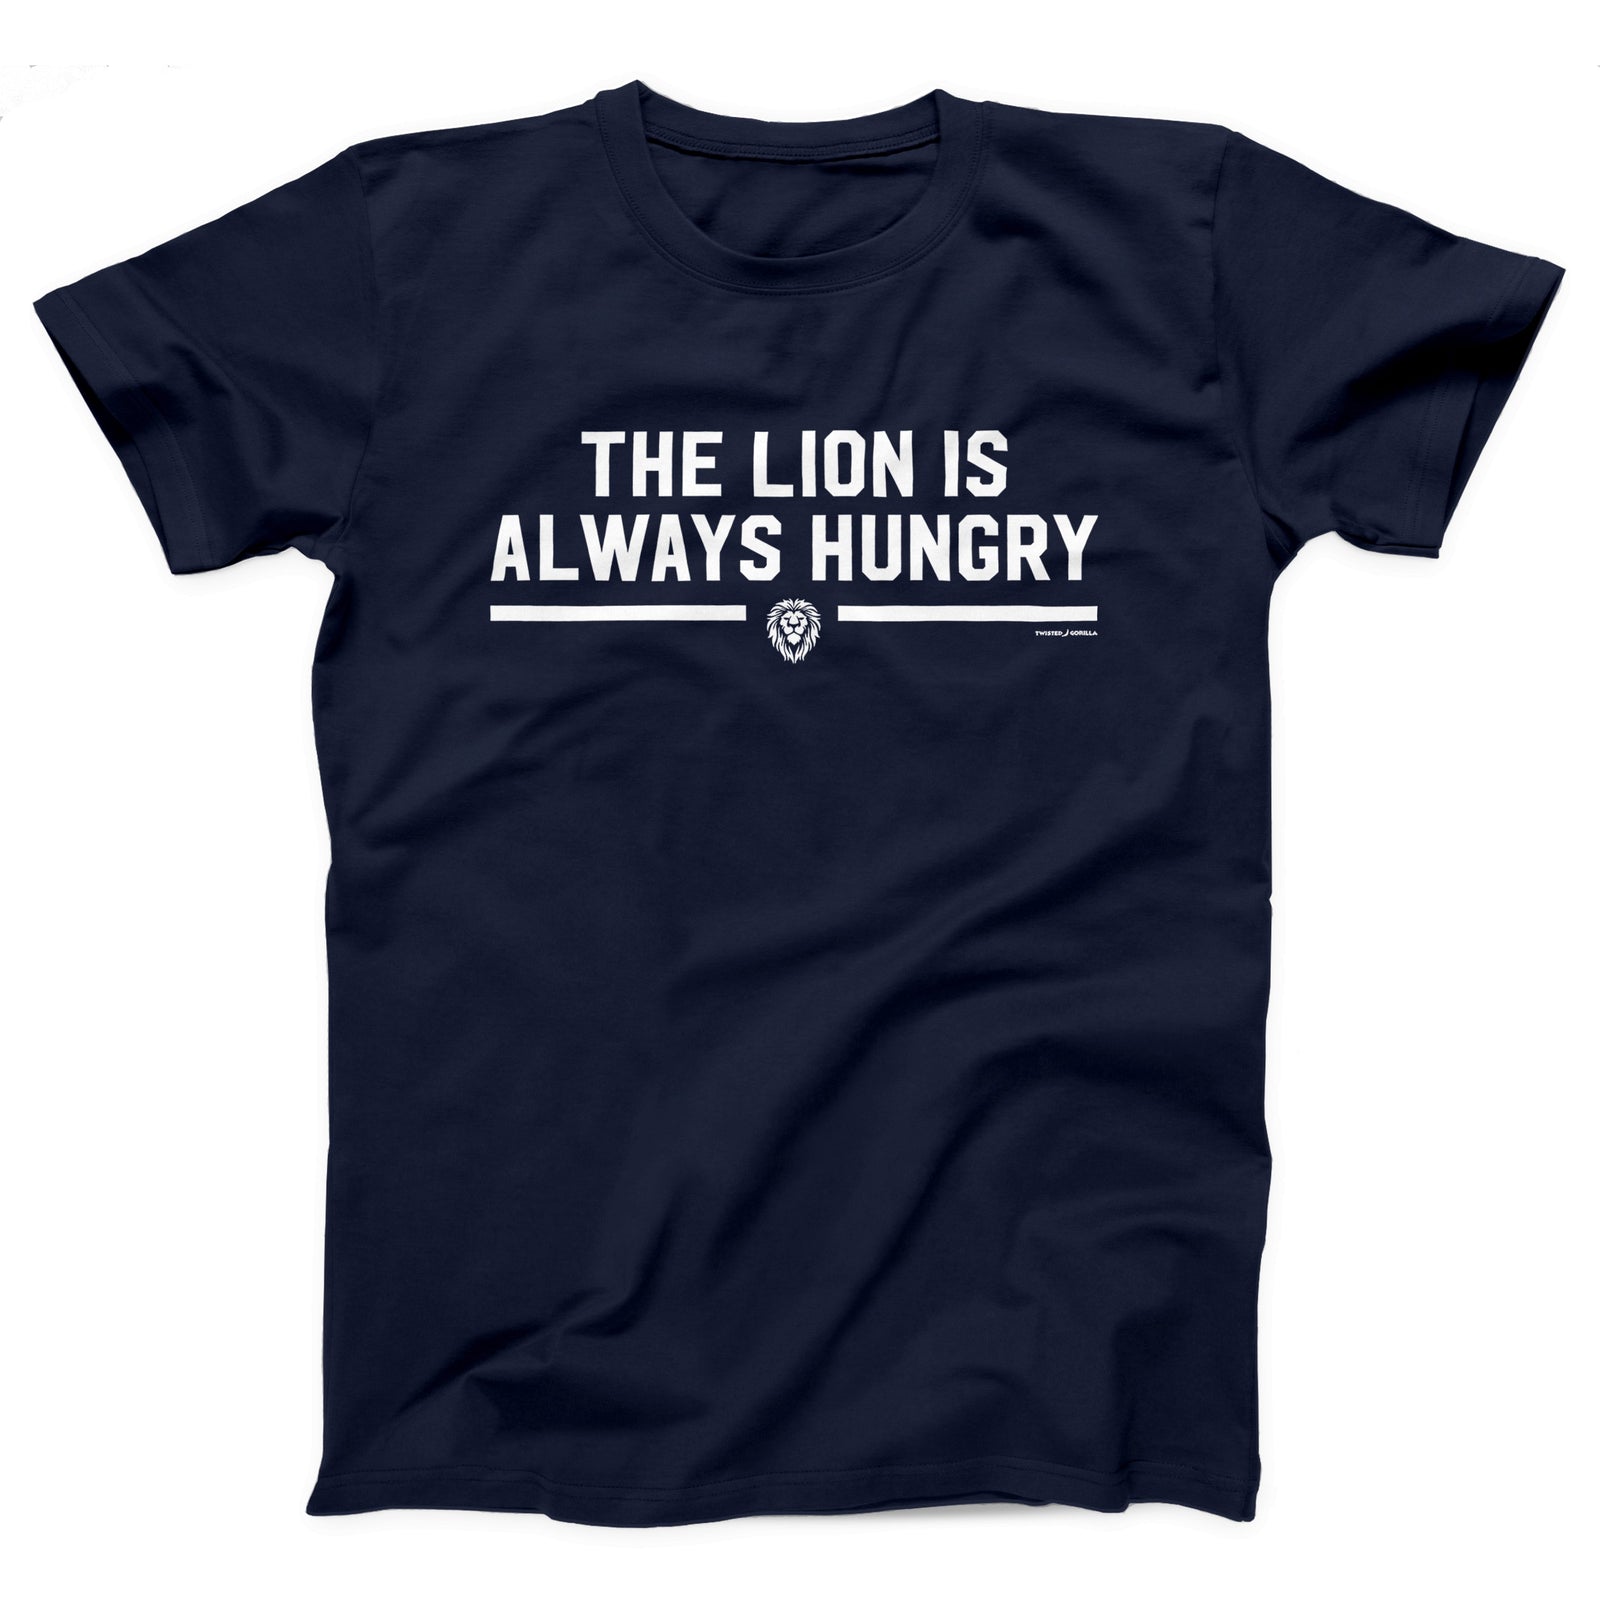 //marionmartigny.com/s/files/1/0274/2488/2766/products/the-lion-is-always-hungry-menunisex-t-shirt-585685_5000x.jpg?v=1652679411 5000w,
    //marionmartigny.com/s/files/1/0274/2488/2766/products/the-lion-is-always-hungry-menunisex-t-shirt-585685_4500x.jpg?v=1652679411 4500w,
    //marionmartigny.com/s/files/1/0274/2488/2766/products/the-lion-is-always-hungry-menunisex-t-shirt-585685_4000x.jpg?v=1652679411 4000w,
    //marionmartigny.com/s/files/1/0274/2488/2766/products/the-lion-is-always-hungry-menunisex-t-shirt-585685_3500x.jpg?v=1652679411 3500w,
    //marionmartigny.com/s/files/1/0274/2488/2766/products/the-lion-is-always-hungry-menunisex-t-shirt-585685_3000x.jpg?v=1652679411 3000w,
    //marionmartigny.com/s/files/1/0274/2488/2766/products/the-lion-is-always-hungry-menunisex-t-shirt-585685_2500x.jpg?v=1652679411 2500w,
    //marionmartigny.com/s/files/1/0274/2488/2766/products/the-lion-is-always-hungry-menunisex-t-shirt-585685_2000x.jpg?v=1652679411 2000w,
    //marionmartigny.com/s/files/1/0274/2488/2766/products/the-lion-is-always-hungry-menunisex-t-shirt-585685_1800x.jpg?v=1652679411 1800w,
    //marionmartigny.com/s/files/1/0274/2488/2766/products/the-lion-is-always-hungry-menunisex-t-shirt-585685_1600x.jpg?v=1652679411 1600w,
    //marionmartigny.com/s/files/1/0274/2488/2766/products/the-lion-is-always-hungry-menunisex-t-shirt-585685_1400x.jpg?v=1652679411 1400w,
    //marionmartigny.com/s/files/1/0274/2488/2766/products/the-lion-is-always-hungry-menunisex-t-shirt-585685_1200x.jpg?v=1652679411 1200w,
    //marionmartigny.com/s/files/1/0274/2488/2766/products/the-lion-is-always-hungry-menunisex-t-shirt-585685_1000x.jpg?v=1652679411 1000w,
    //marionmartigny.com/s/files/1/0274/2488/2766/products/the-lion-is-always-hungry-menunisex-t-shirt-585685_800x.jpg?v=1652679411 800w,
    //marionmartigny.com/s/files/1/0274/2488/2766/products/the-lion-is-always-hungry-menunisex-t-shirt-585685_600x.jpg?v=1652679411 600w,
    //marionmartigny.com/s/files/1/0274/2488/2766/products/the-lion-is-always-hungry-menunisex-t-shirt-585685_400x.jpg?v=1652679411 400w,
    //marionmartigny.com/s/files/1/0274/2488/2766/products/the-lion-is-always-hungry-menunisex-t-shirt-585685_200x.jpg?v=1652679411 200w